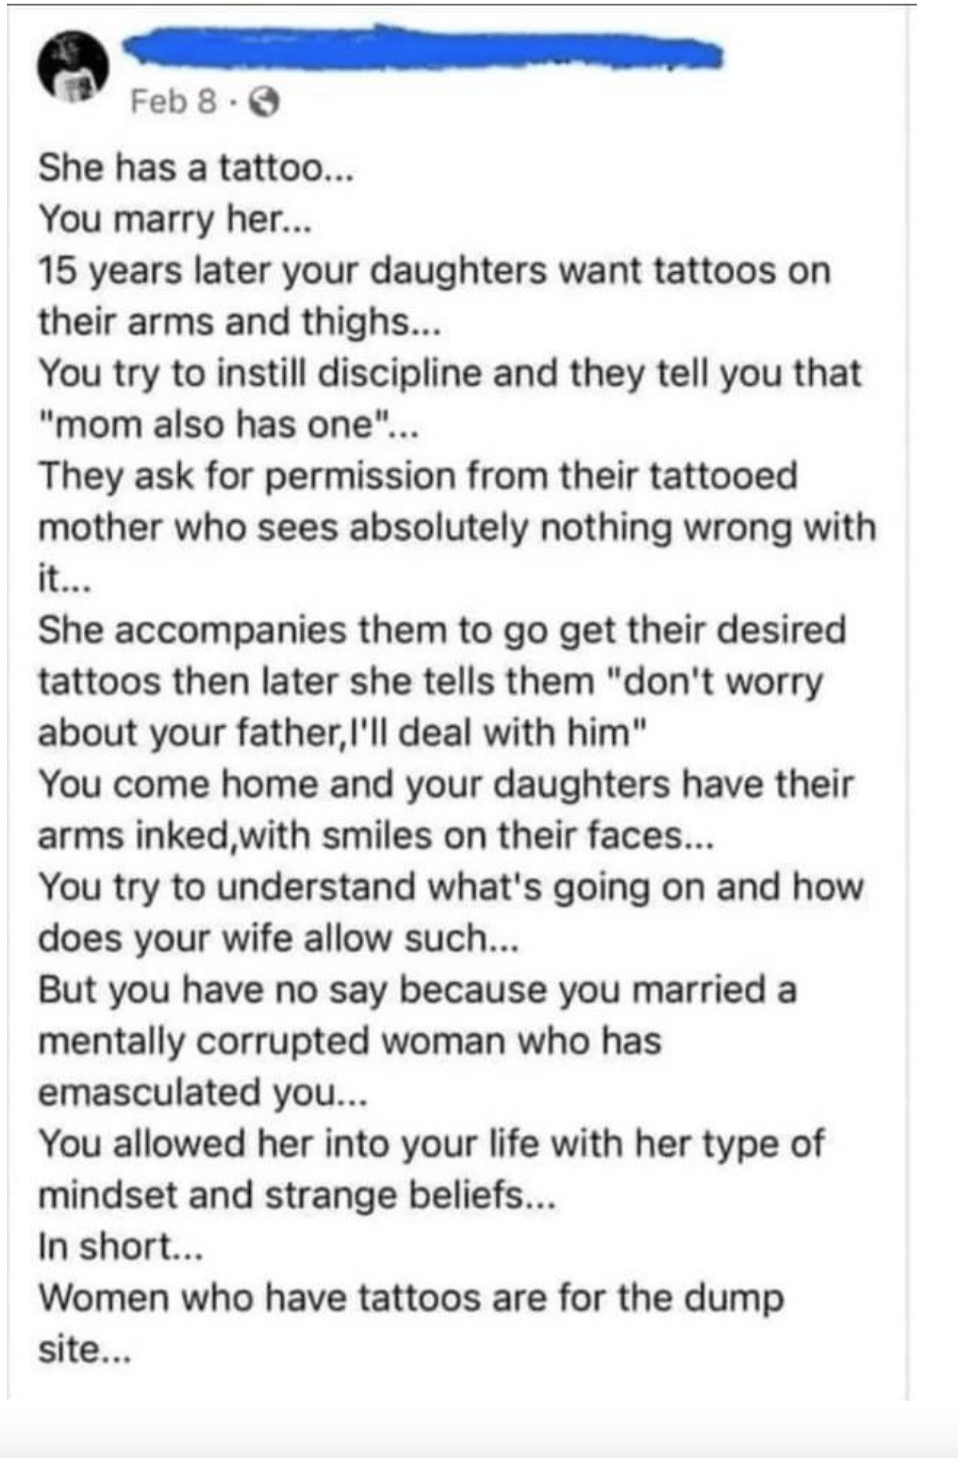 A man saying, "women who have tattoos are for the dump site..."